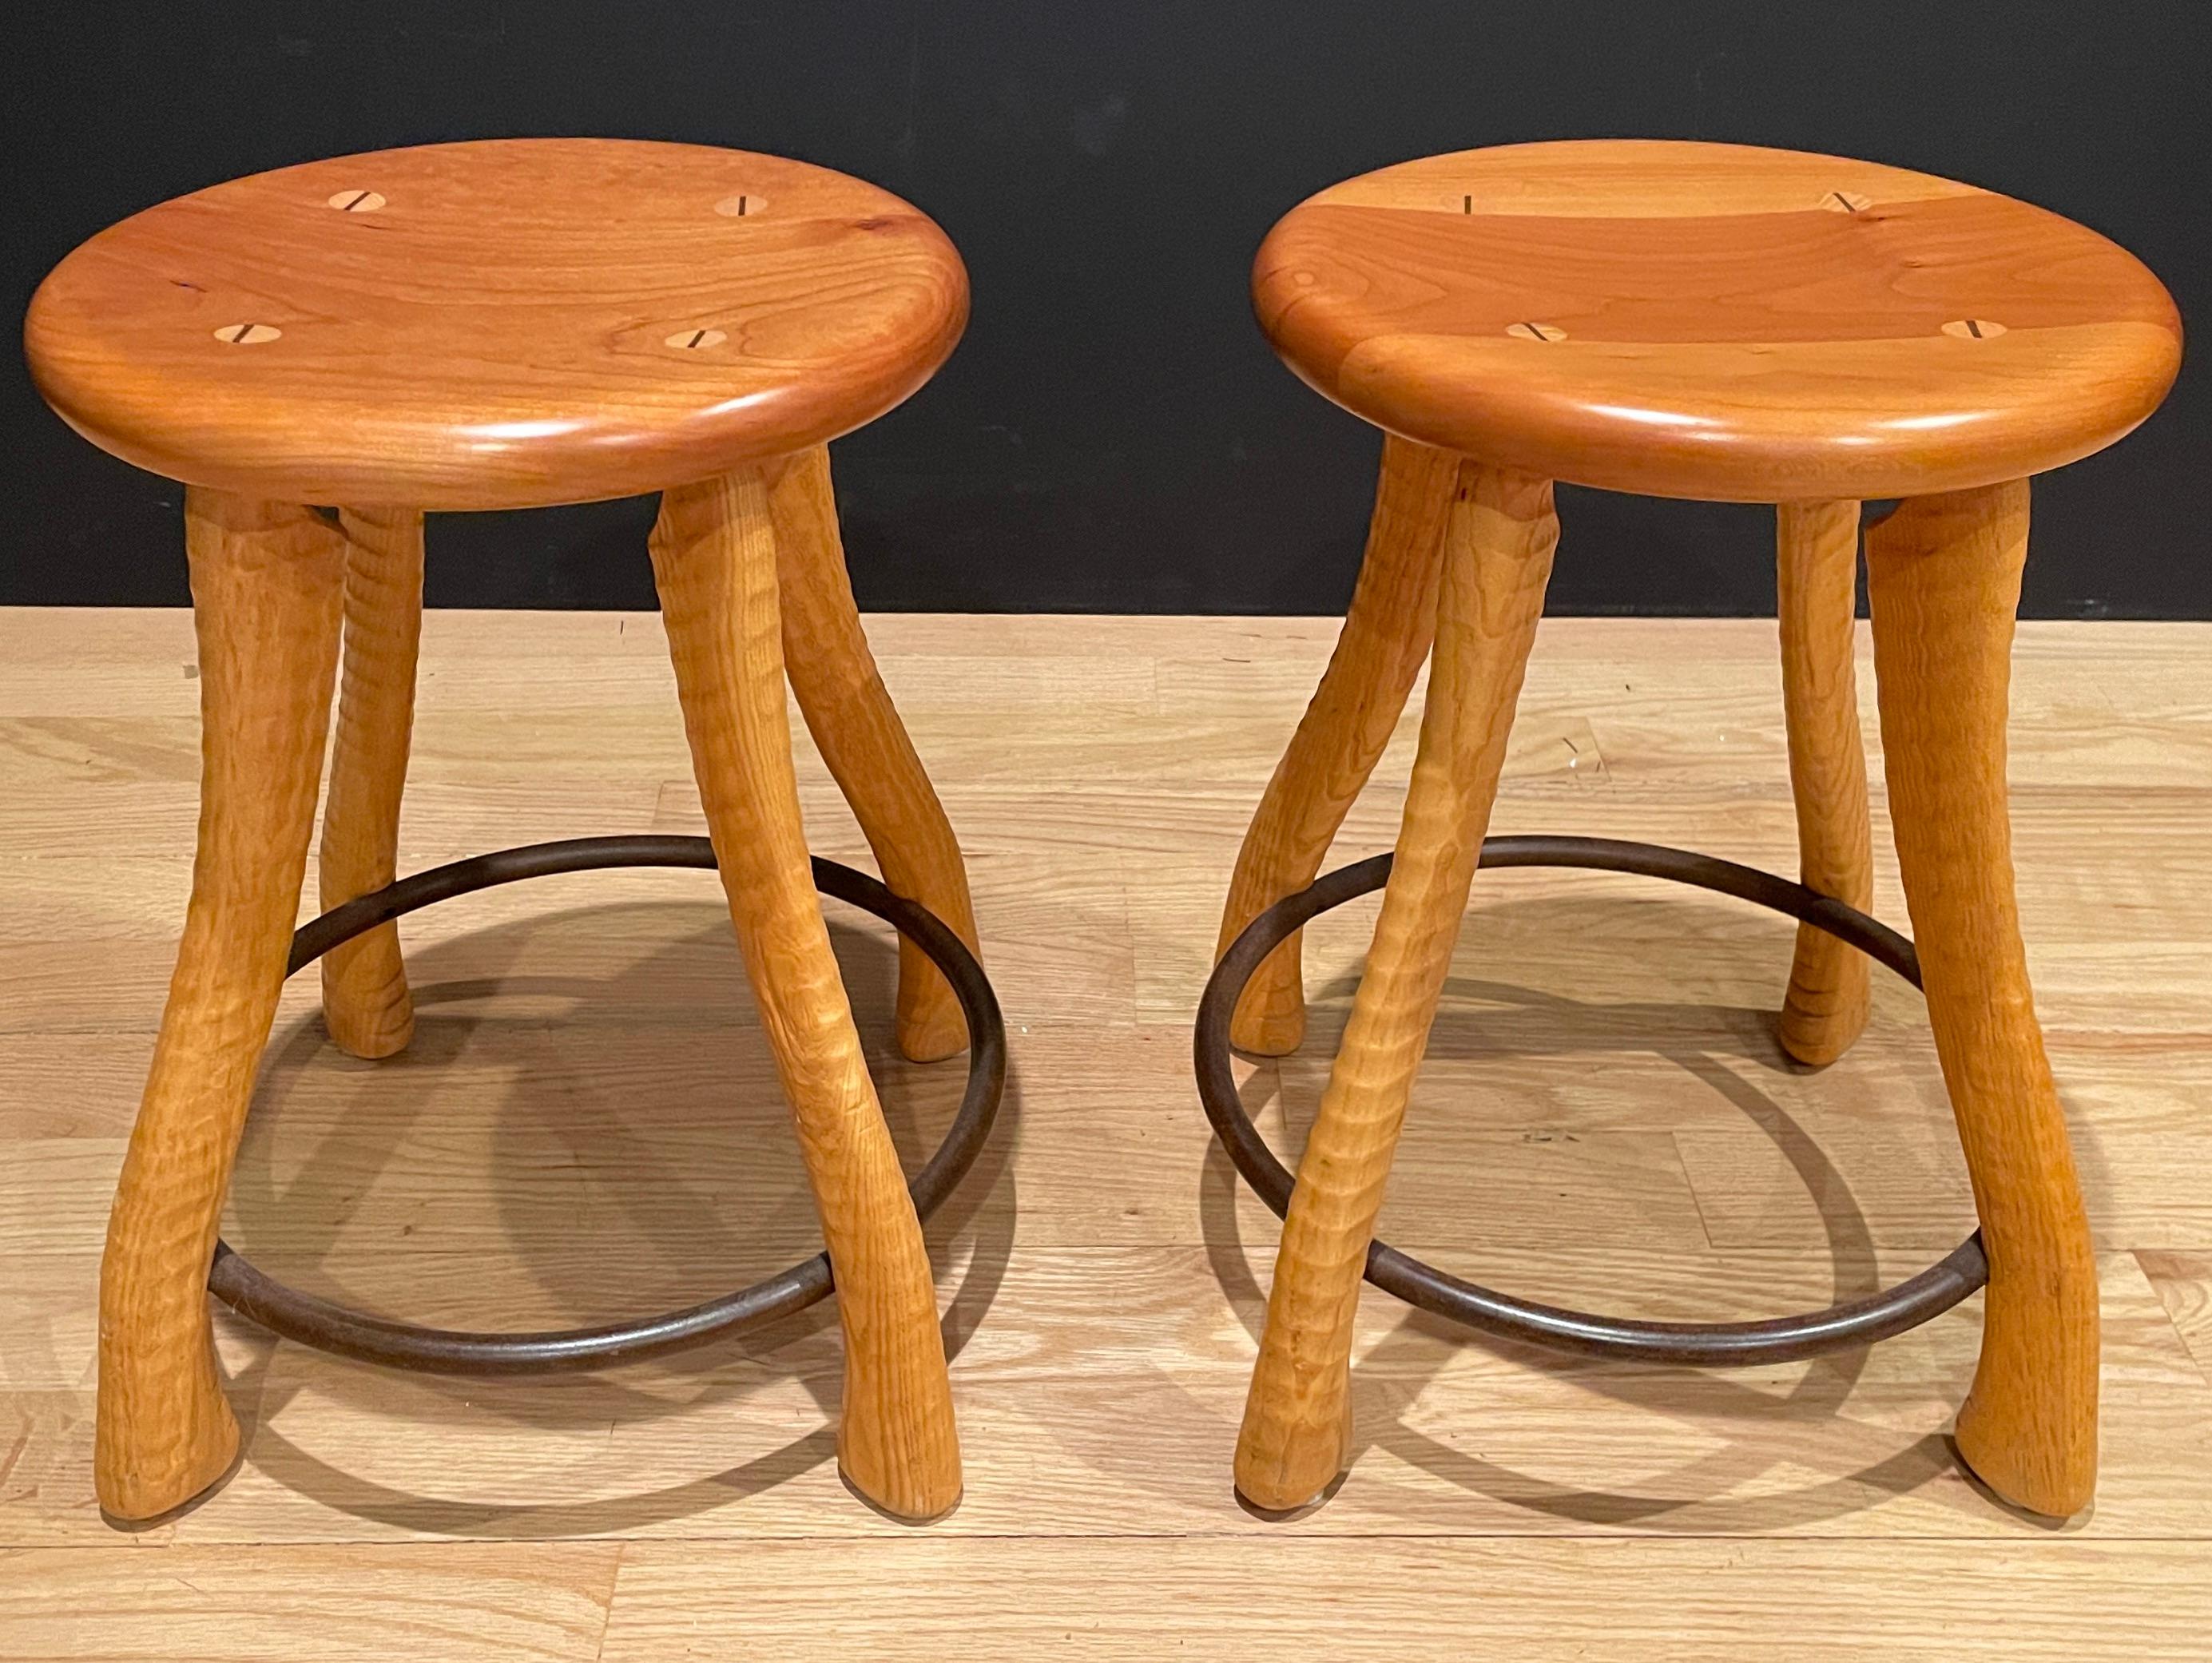 Uniquely designed wood and iron stools. Farmhouse country style with ax handle form legs supported by through dowels and iron ring. Designed and bench made by Bradford Woodworking of Worcester, Pennsylvania. 
Seat Diameter 13